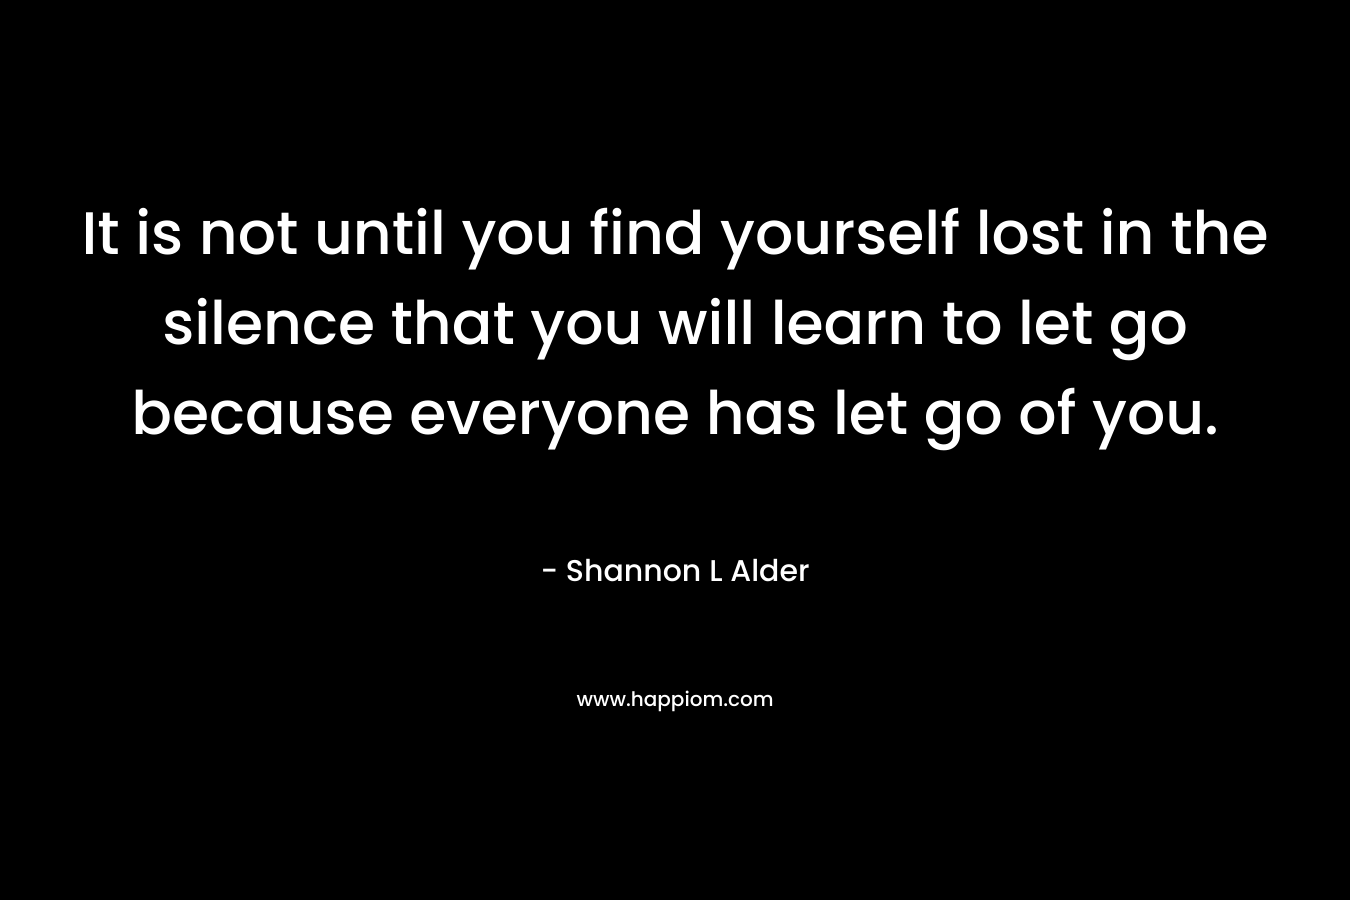 It is not until you find yourself lost in the silence that you will learn to let go because everyone has let go of you. – Shannon L Alder